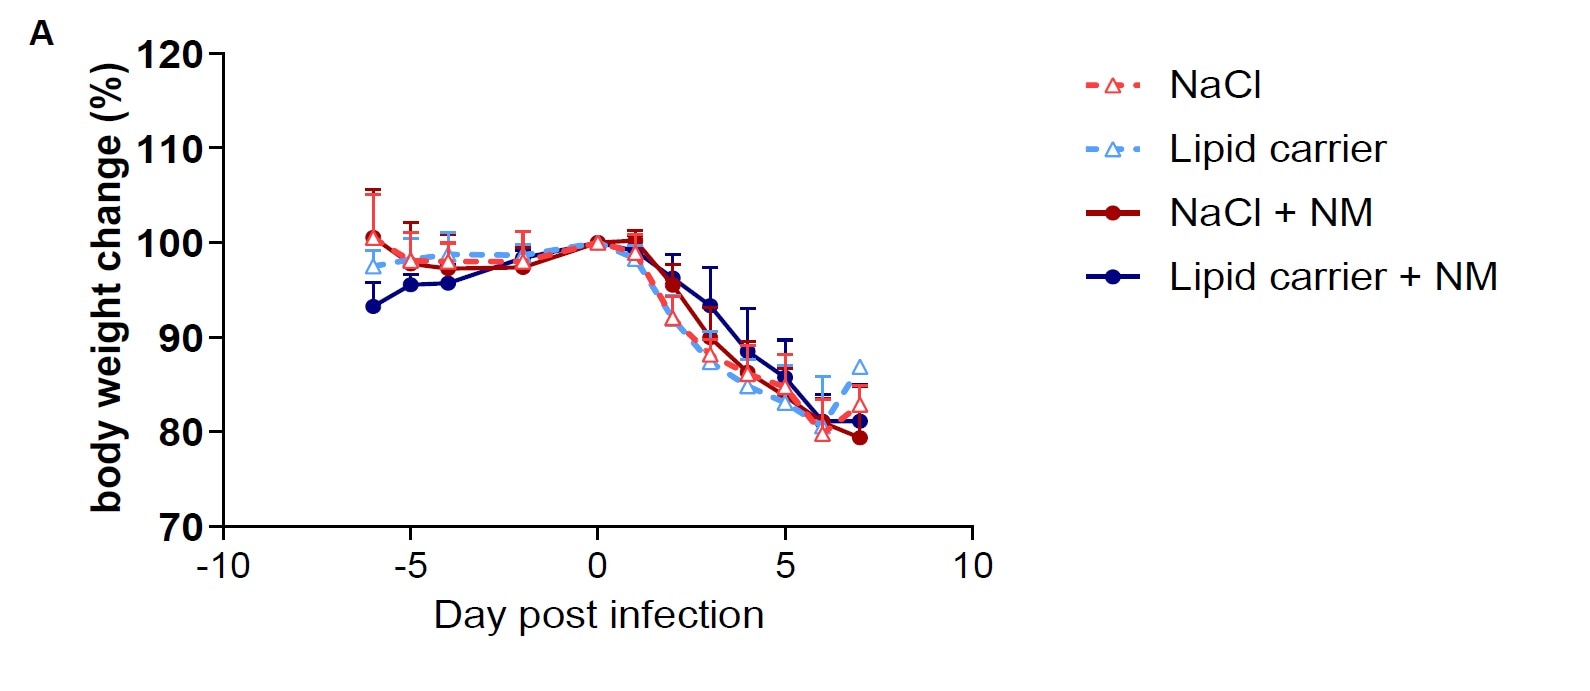 Bodyweight loss is not prevented by single Nafamostat mesylate +/- lipid carrier nasal application. Each 10 animals (8 animals from day 2 on) were pretreated by single nasal treatment application as indicated and daily weighed post nasal SARS-CoV2 virus inoculation. All animals were euthanized by day 7 p.i. or when they reached clinical endpoint (>20% weight loss relative to day 0). Error bars represent standard deviation. NM Nafamostat mesylate.